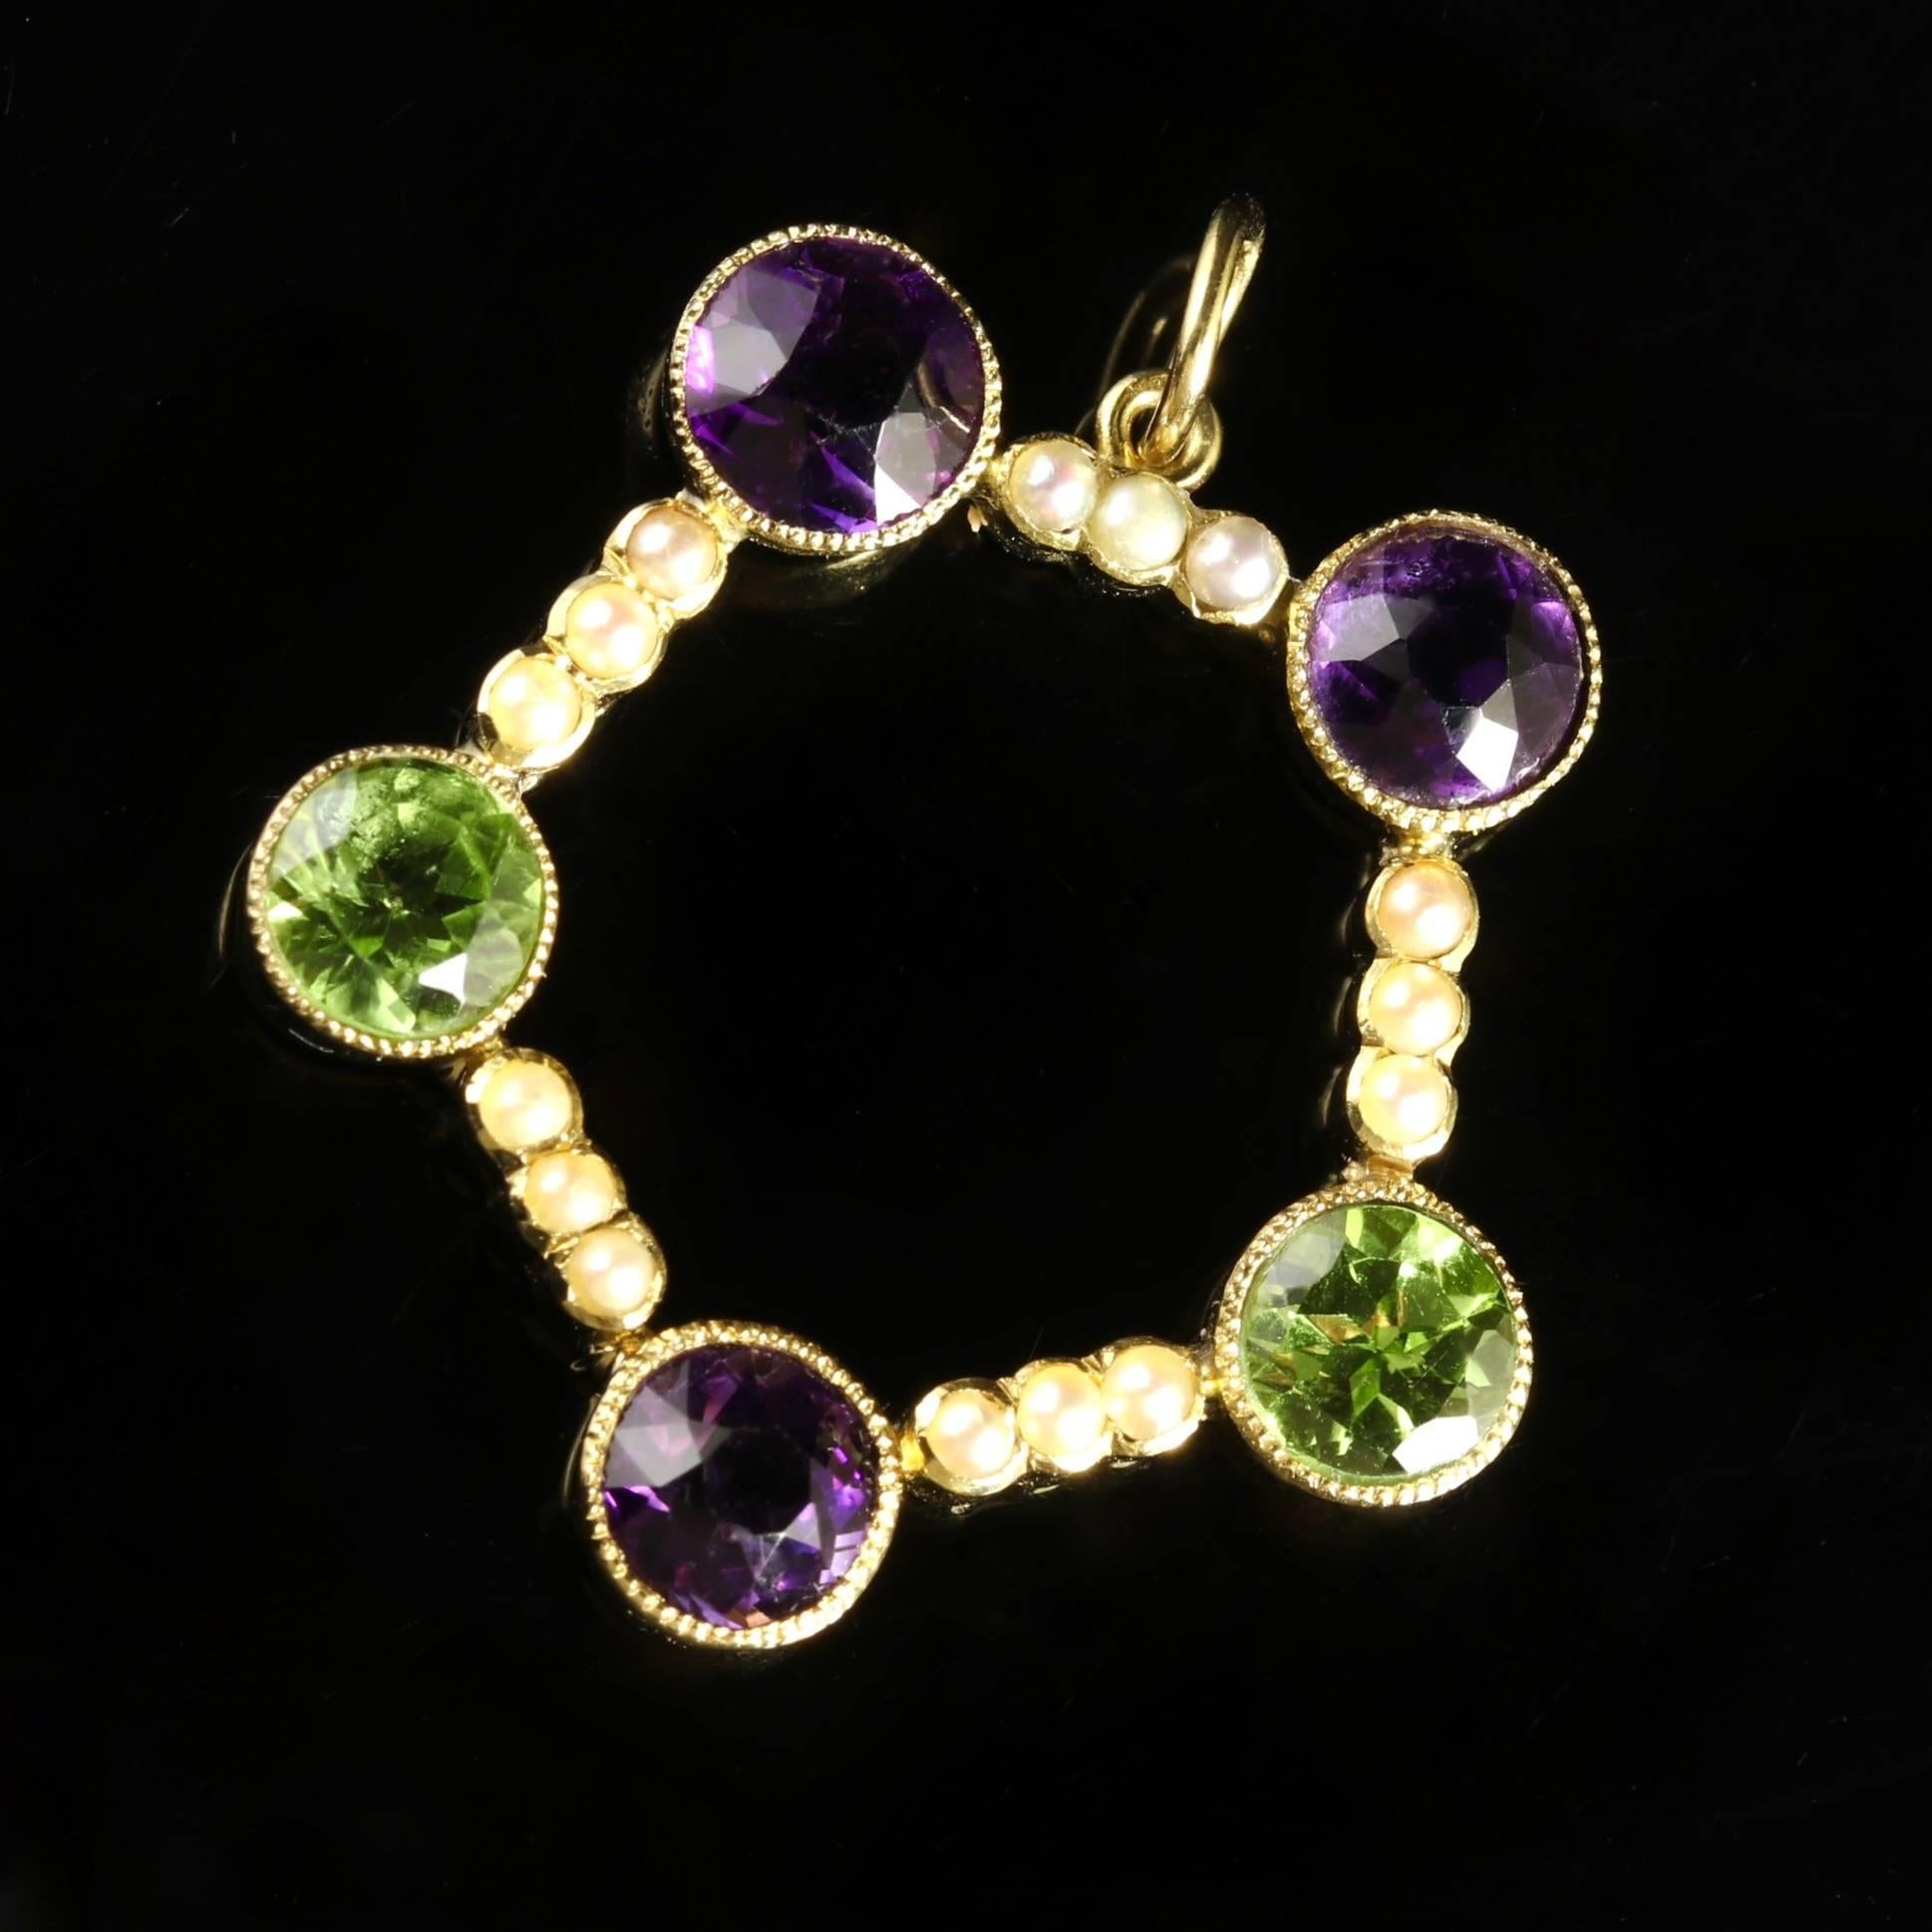 This genuine Victorian pentagon shape antique Suffragette pendant is modelled in 15ct Yellow Gold, Circa 1900.

This beautiful pendant is set with beautiful Peridots, Amethysts and Pearls.

Suffragettes liked to be depicted as feminine. Their